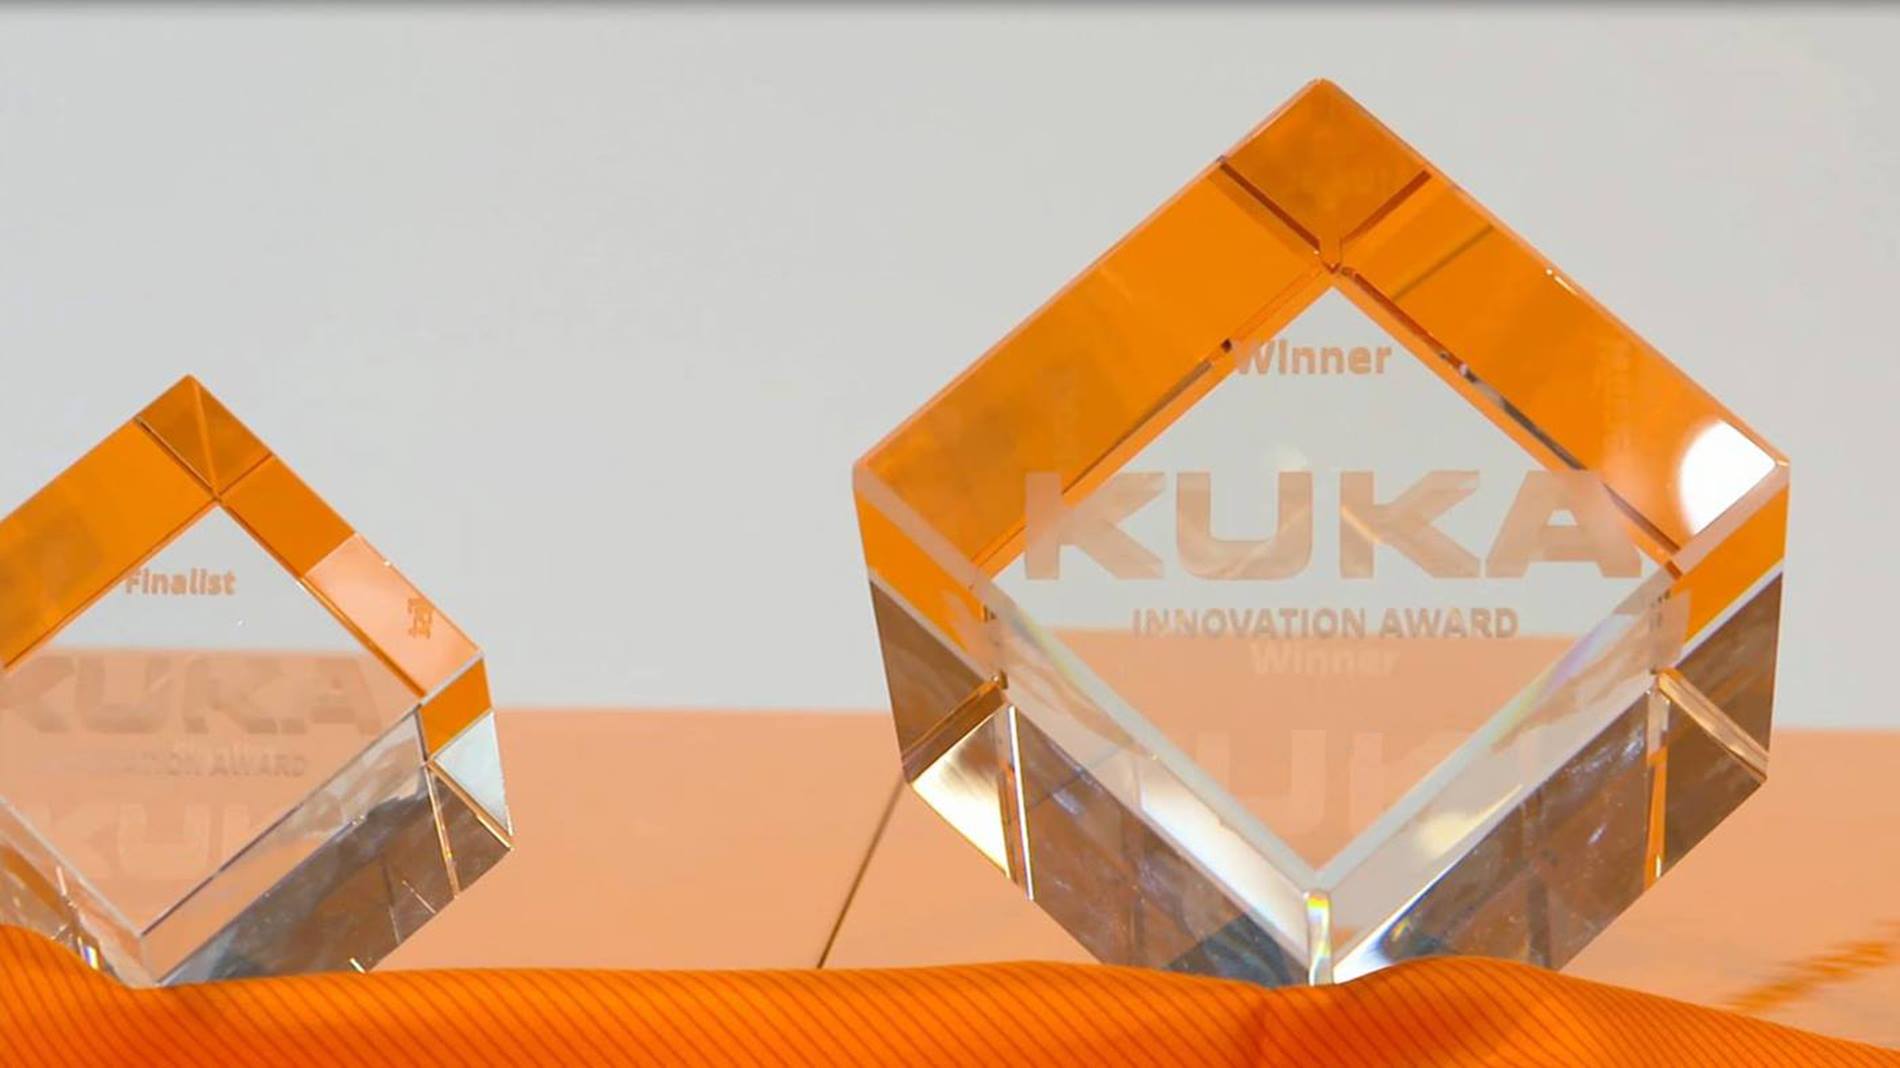 Fnalists for the KUKA Innovation have been selected